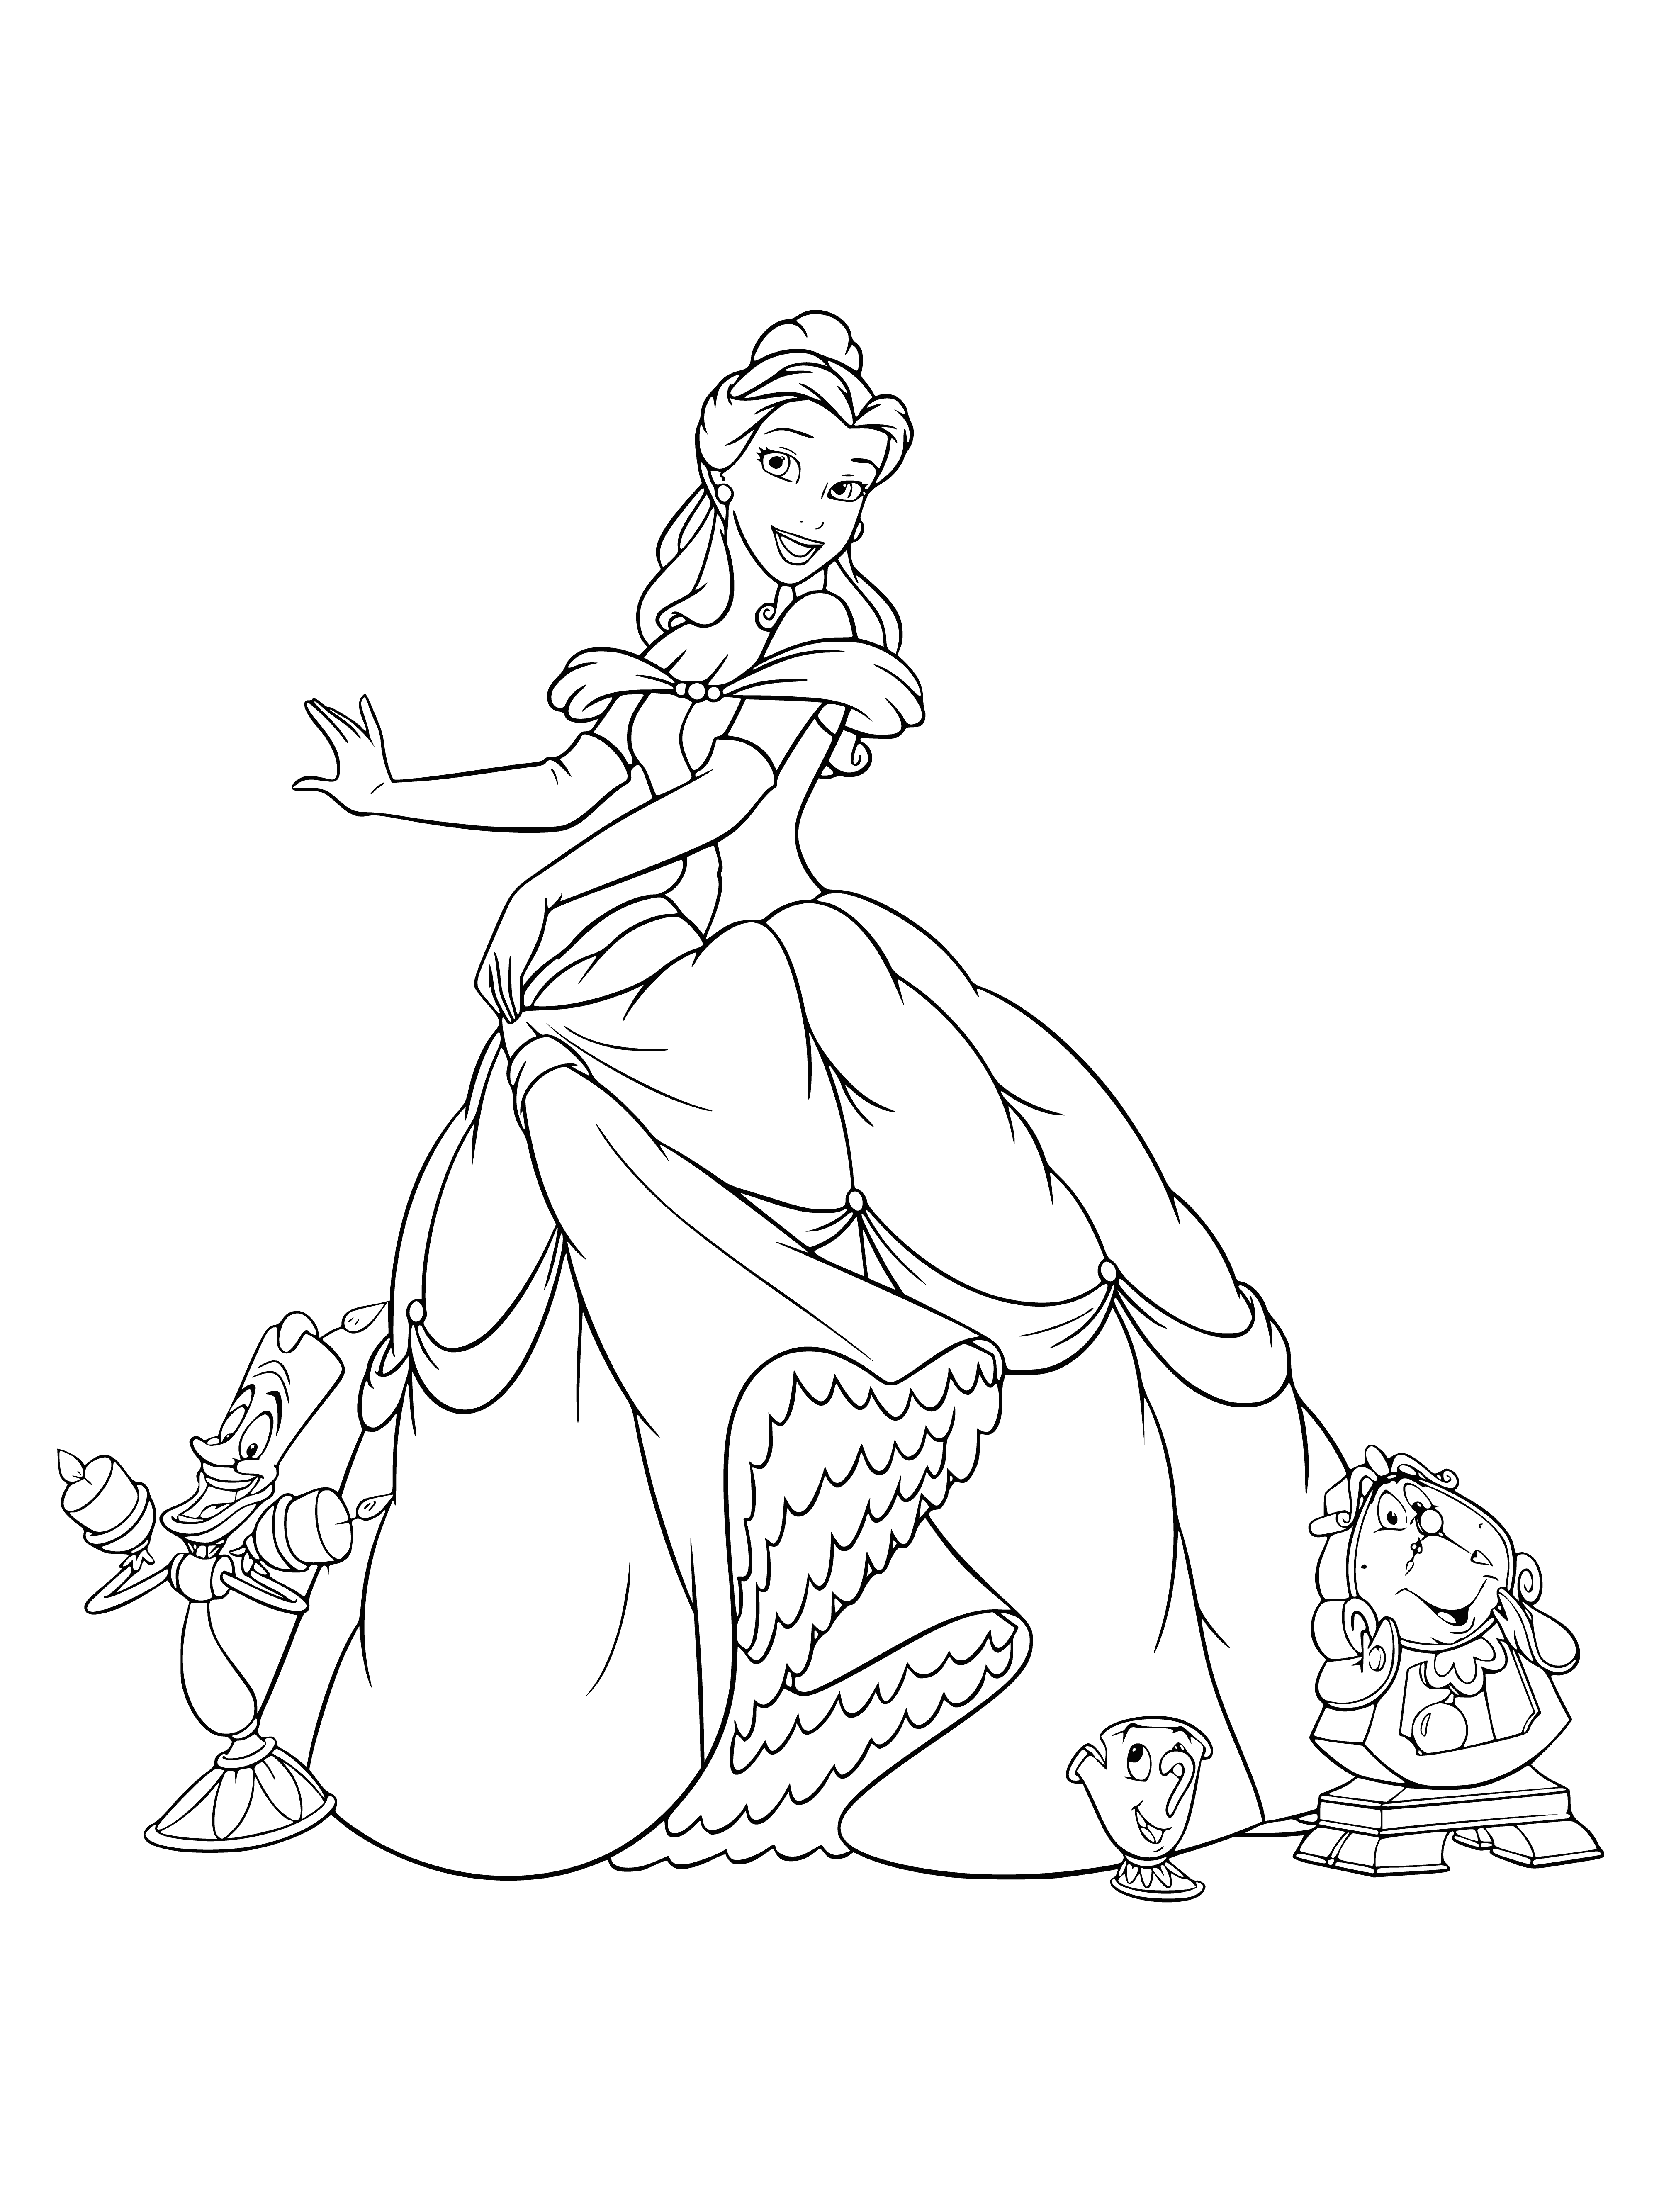 Belle and the servant of the castle coloring page